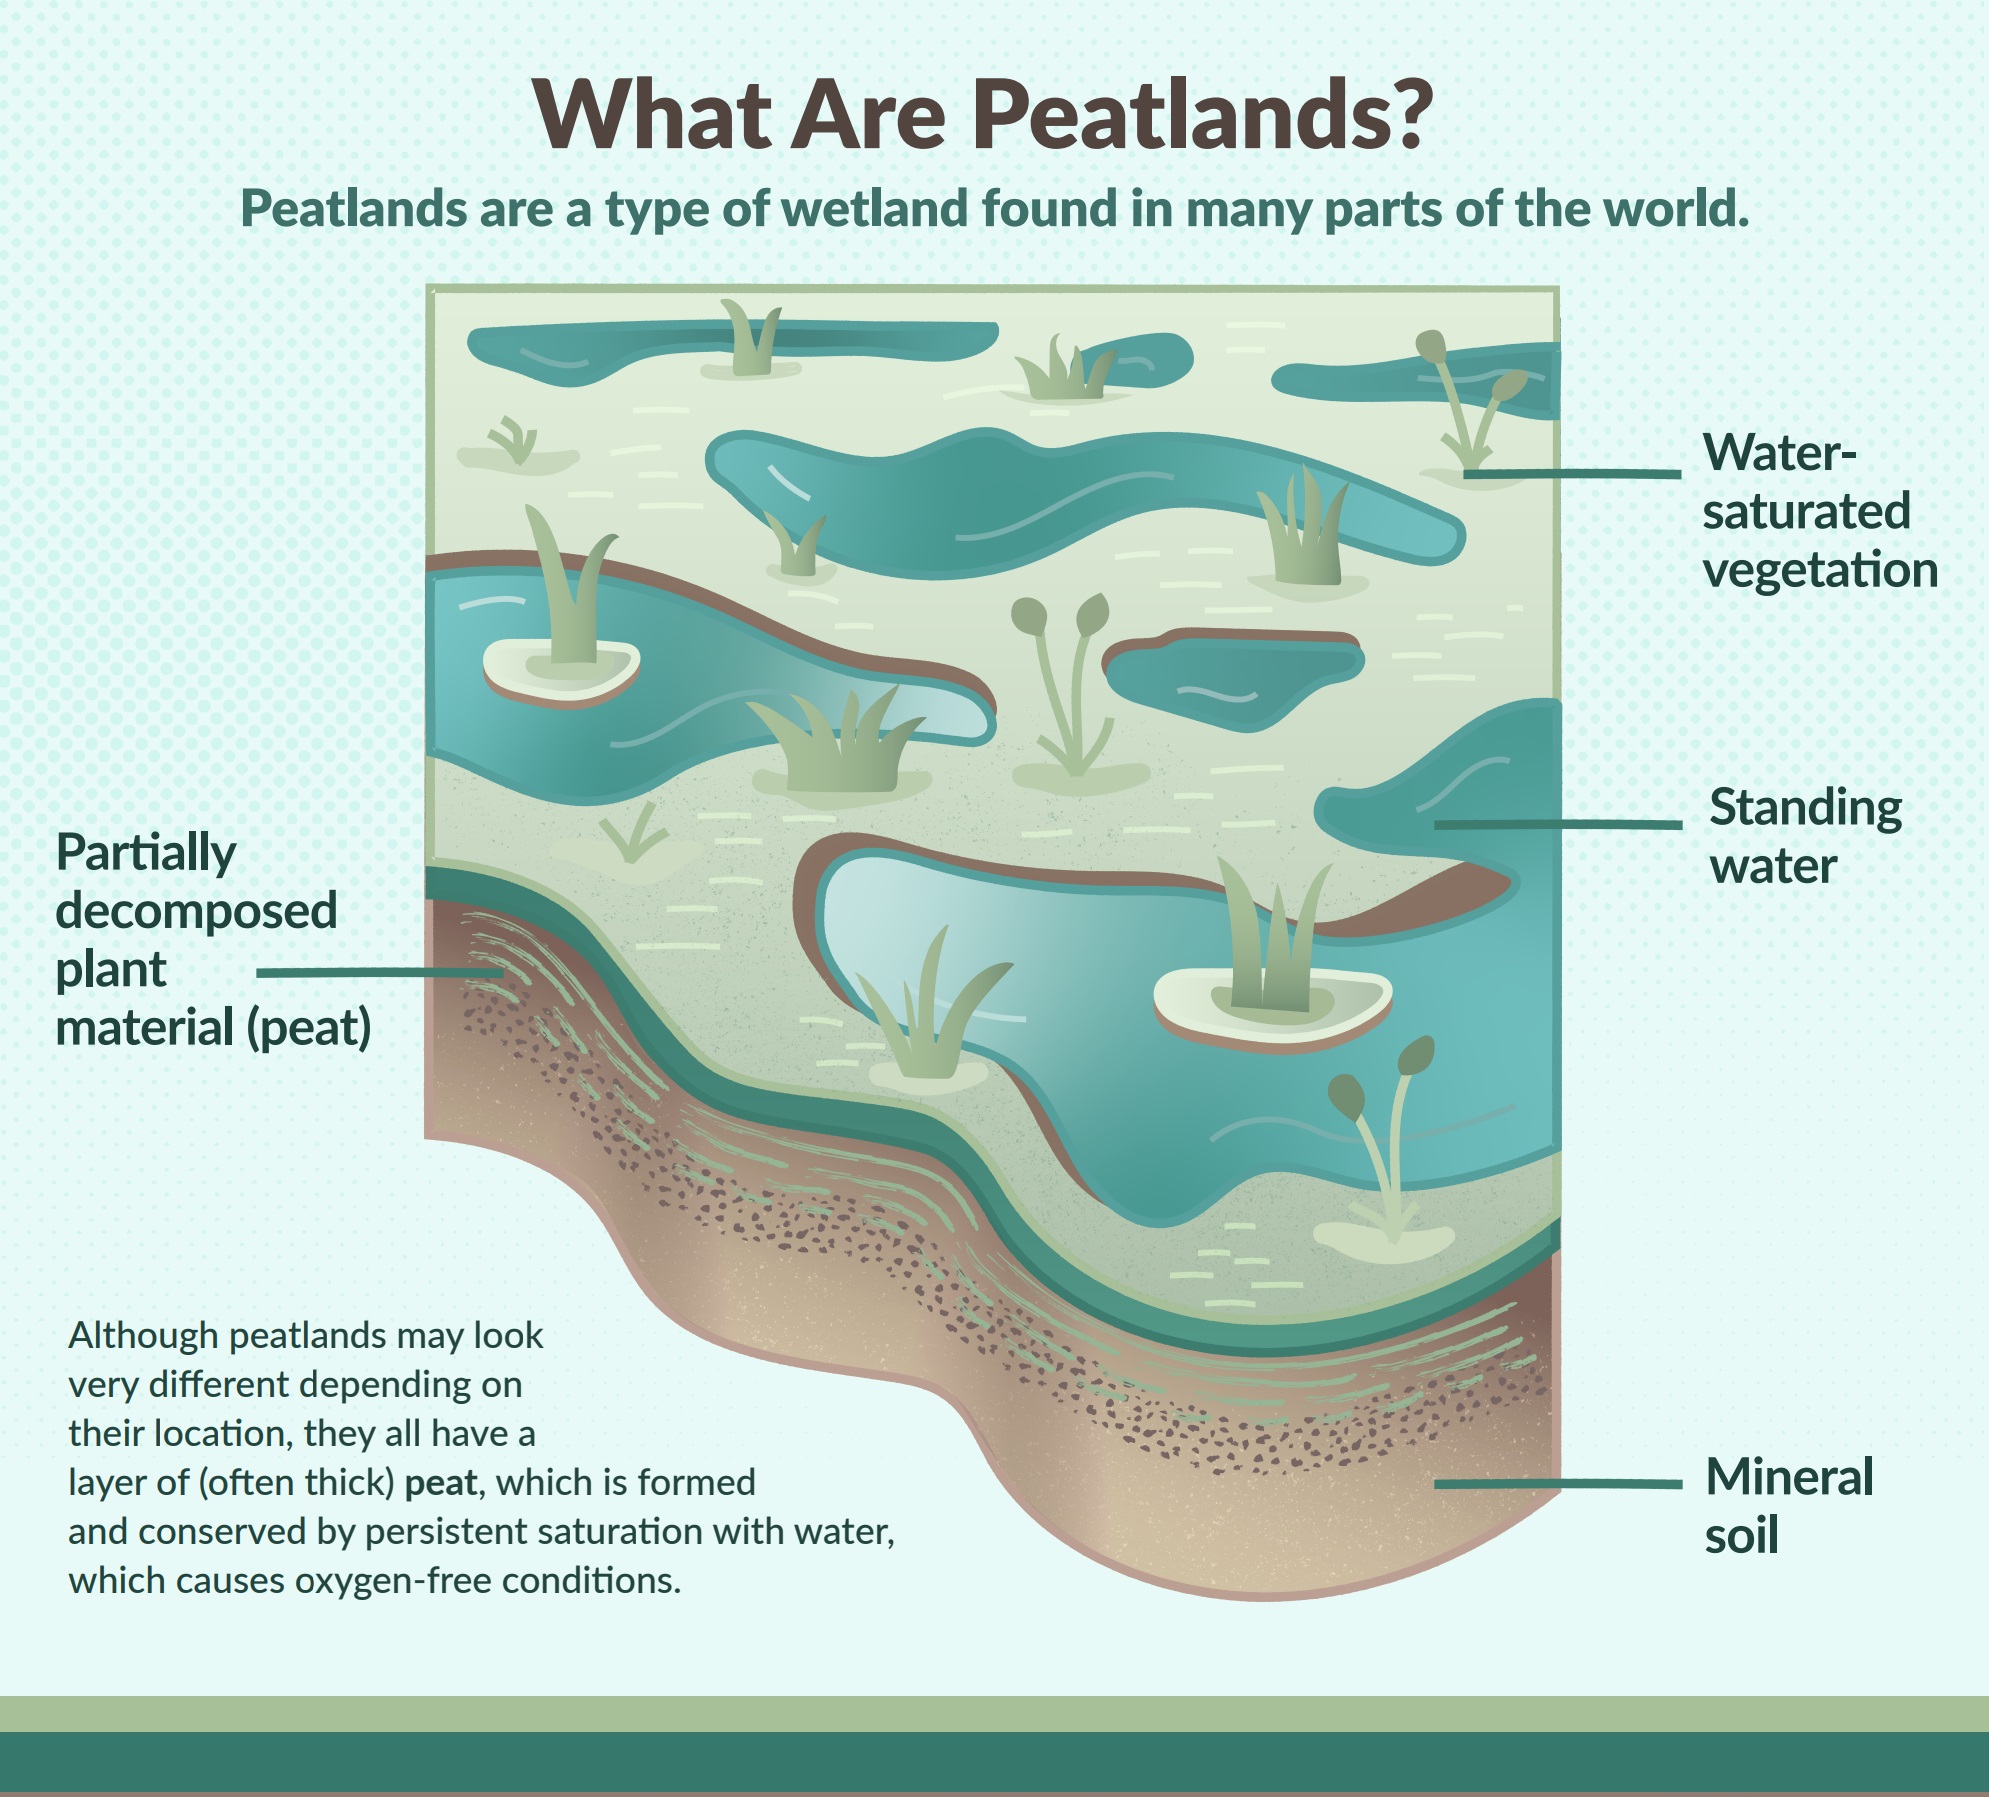 What Are Peatlands? Peatlands are a type of wetland found in many parts of the world. Although peatlands may look very different depending on their location, they all have a layer of (often thick) peat, which is formed and conserved by persistent saturation with water, which causes oxygen-free conditions. 